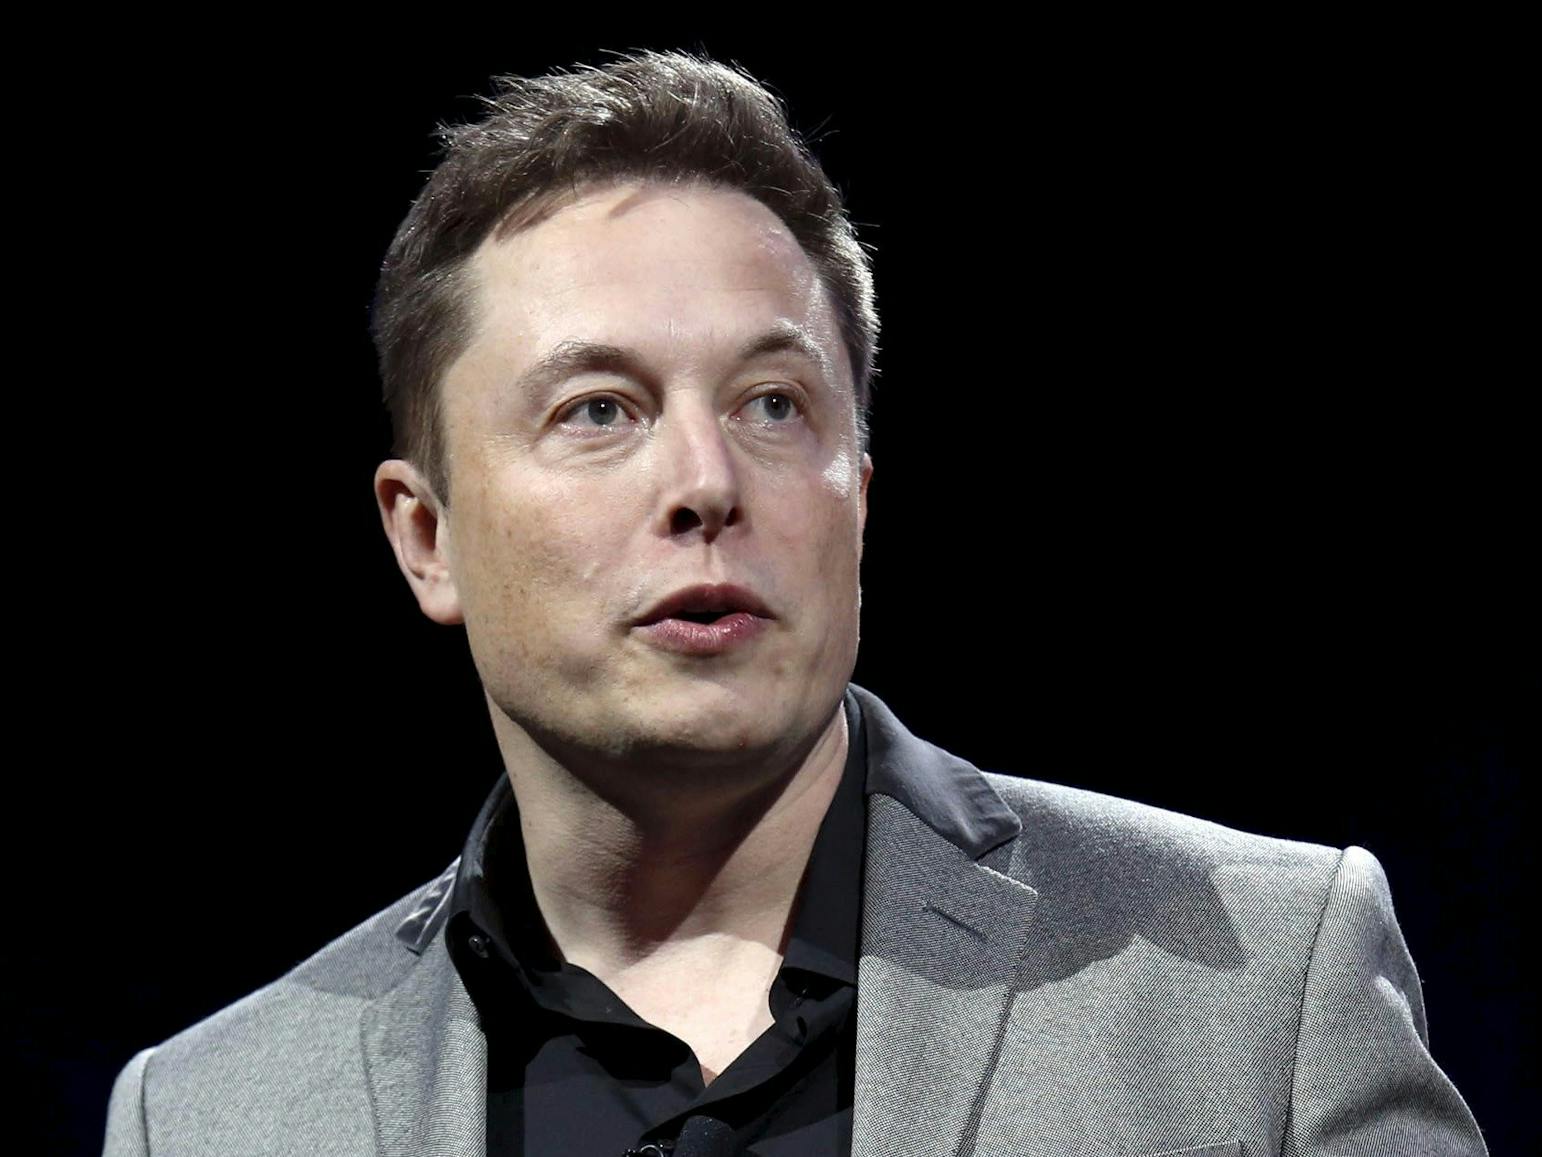 forget-solar-panels-elon-musk-is-thinking-solar-roof-news-archinect